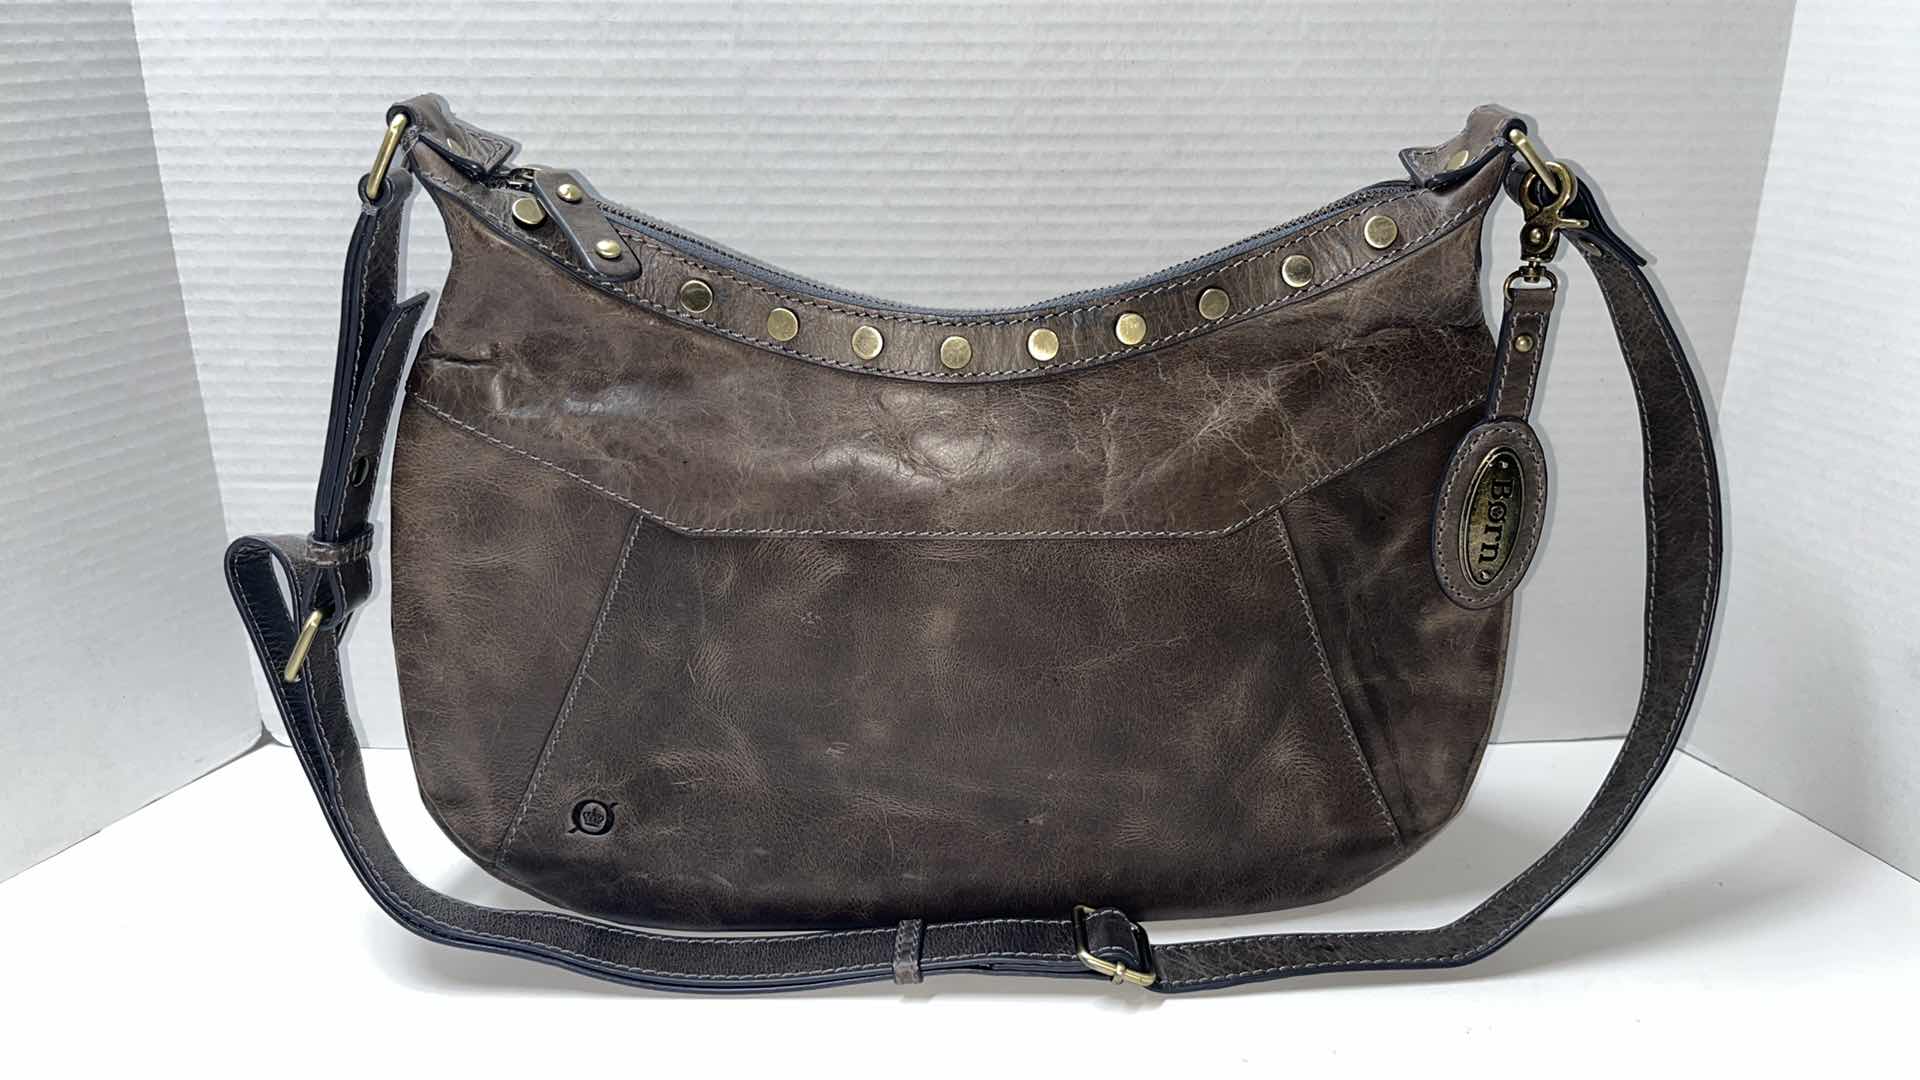 Photo 1 of BORN STUDDED LEATHER LARGE CROSSBODY BAG W RUBBED BRONZE EMBELLISHMENTS, RUSTIC BROWN